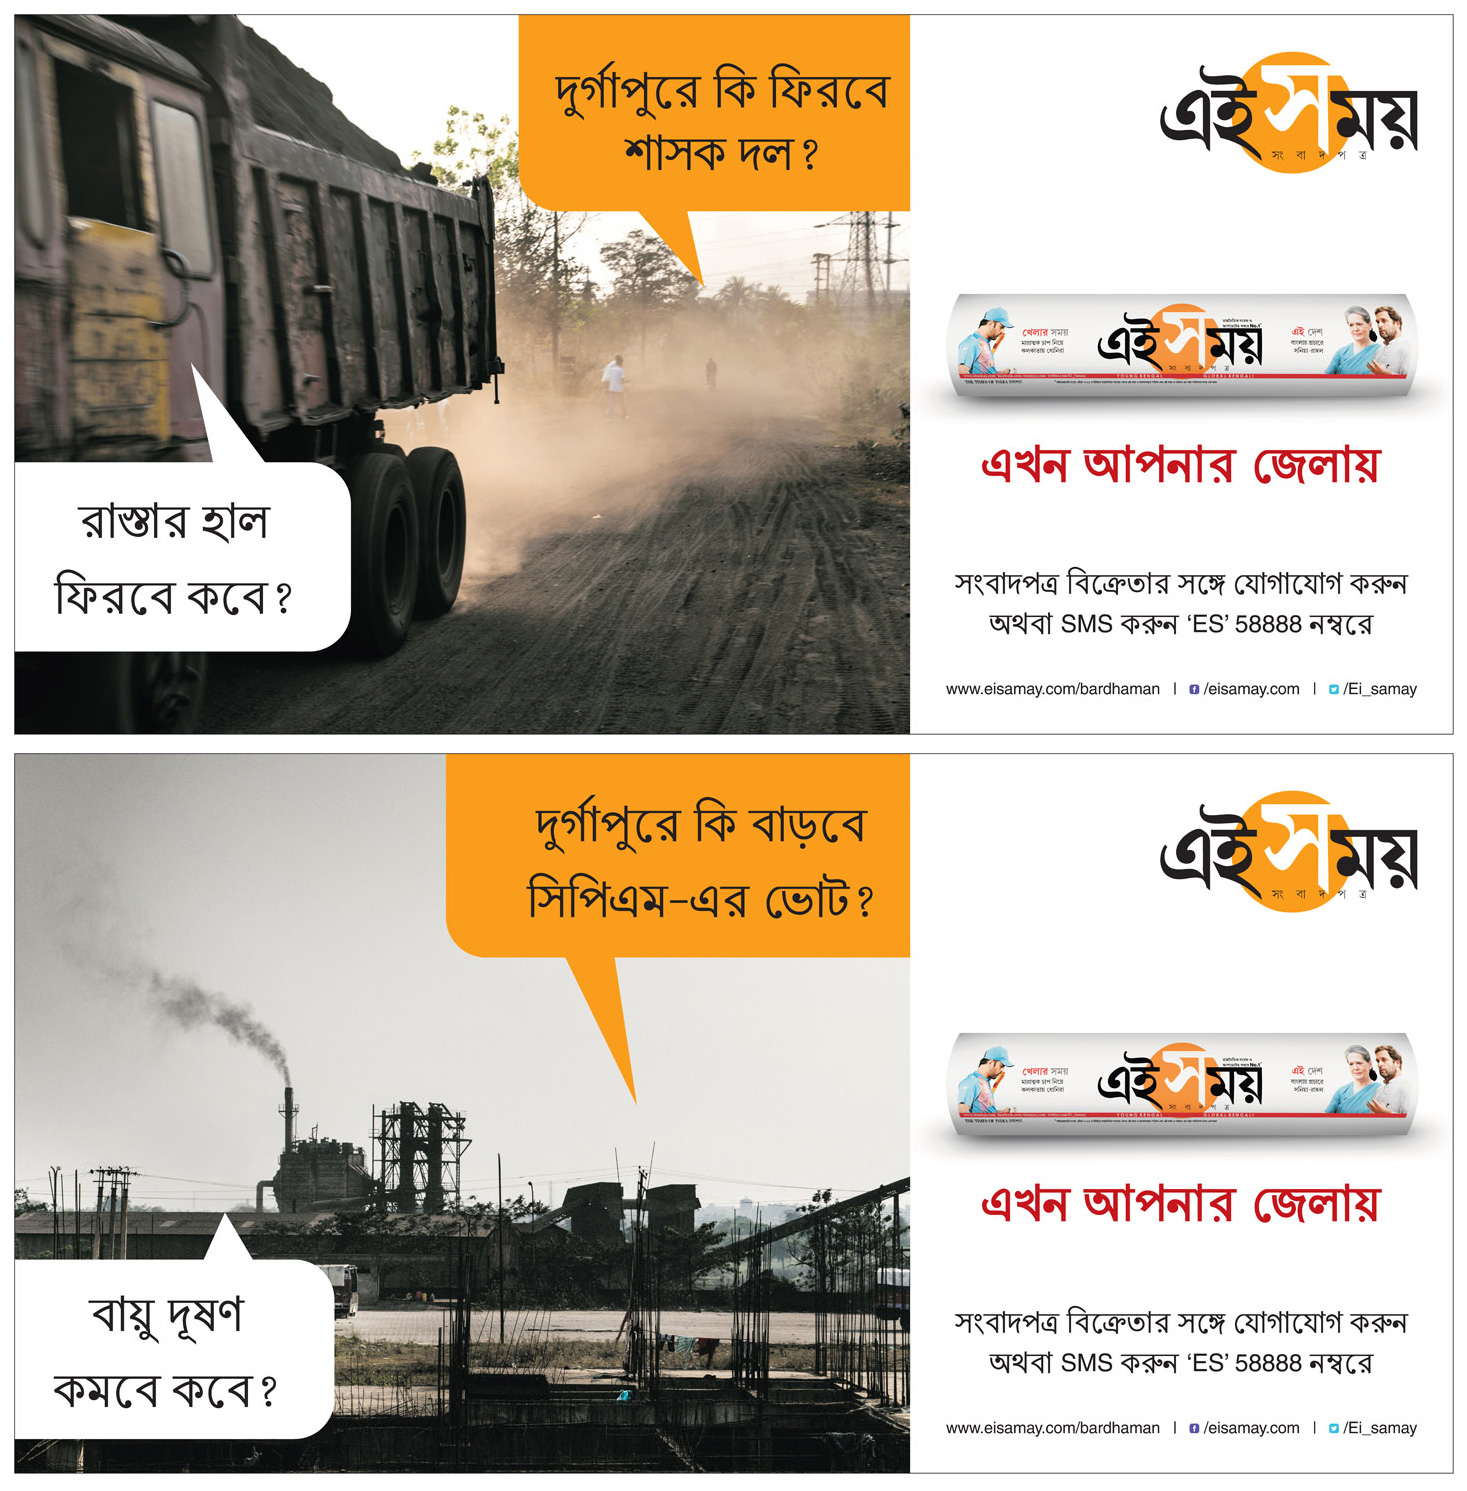 Ei Samay OOH Campaign for Durgapur